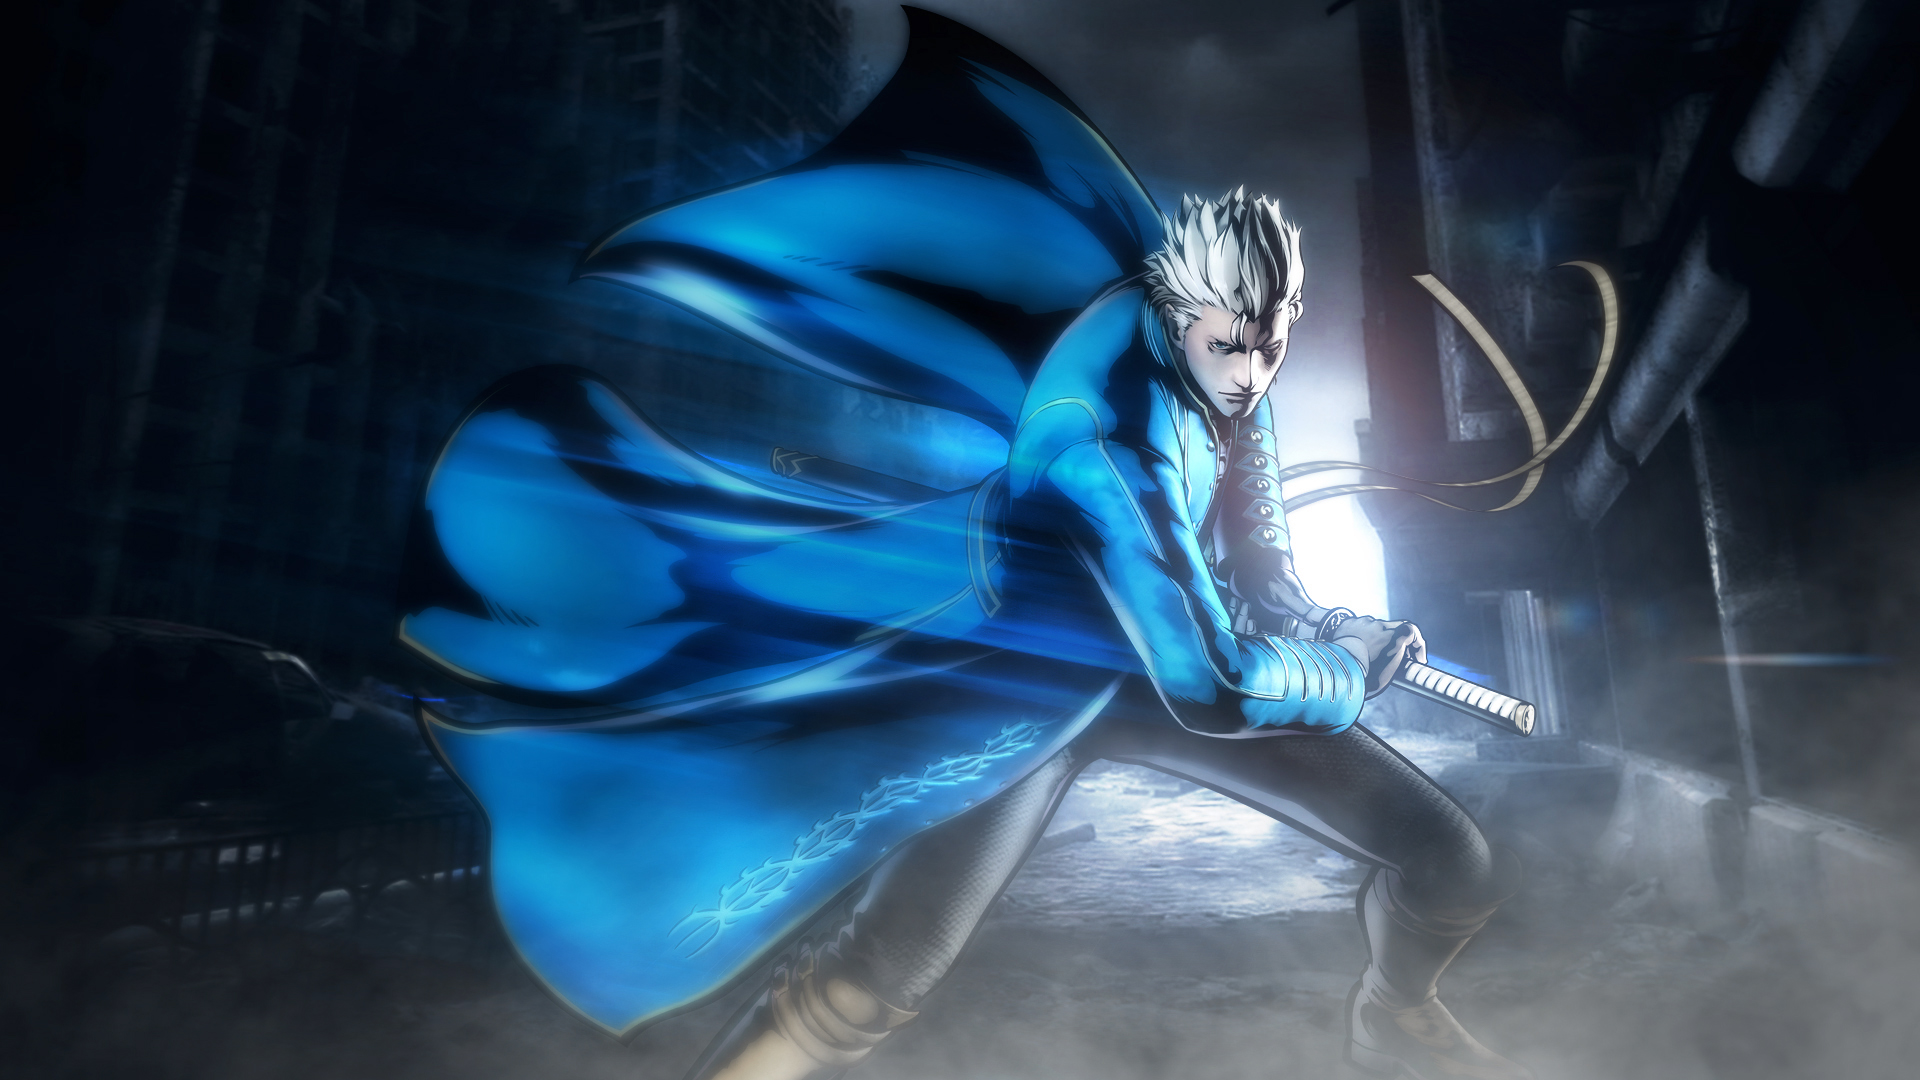 Devil May Cry Wallpaper For Android 46164 Desktop Wallpapers | Top ...